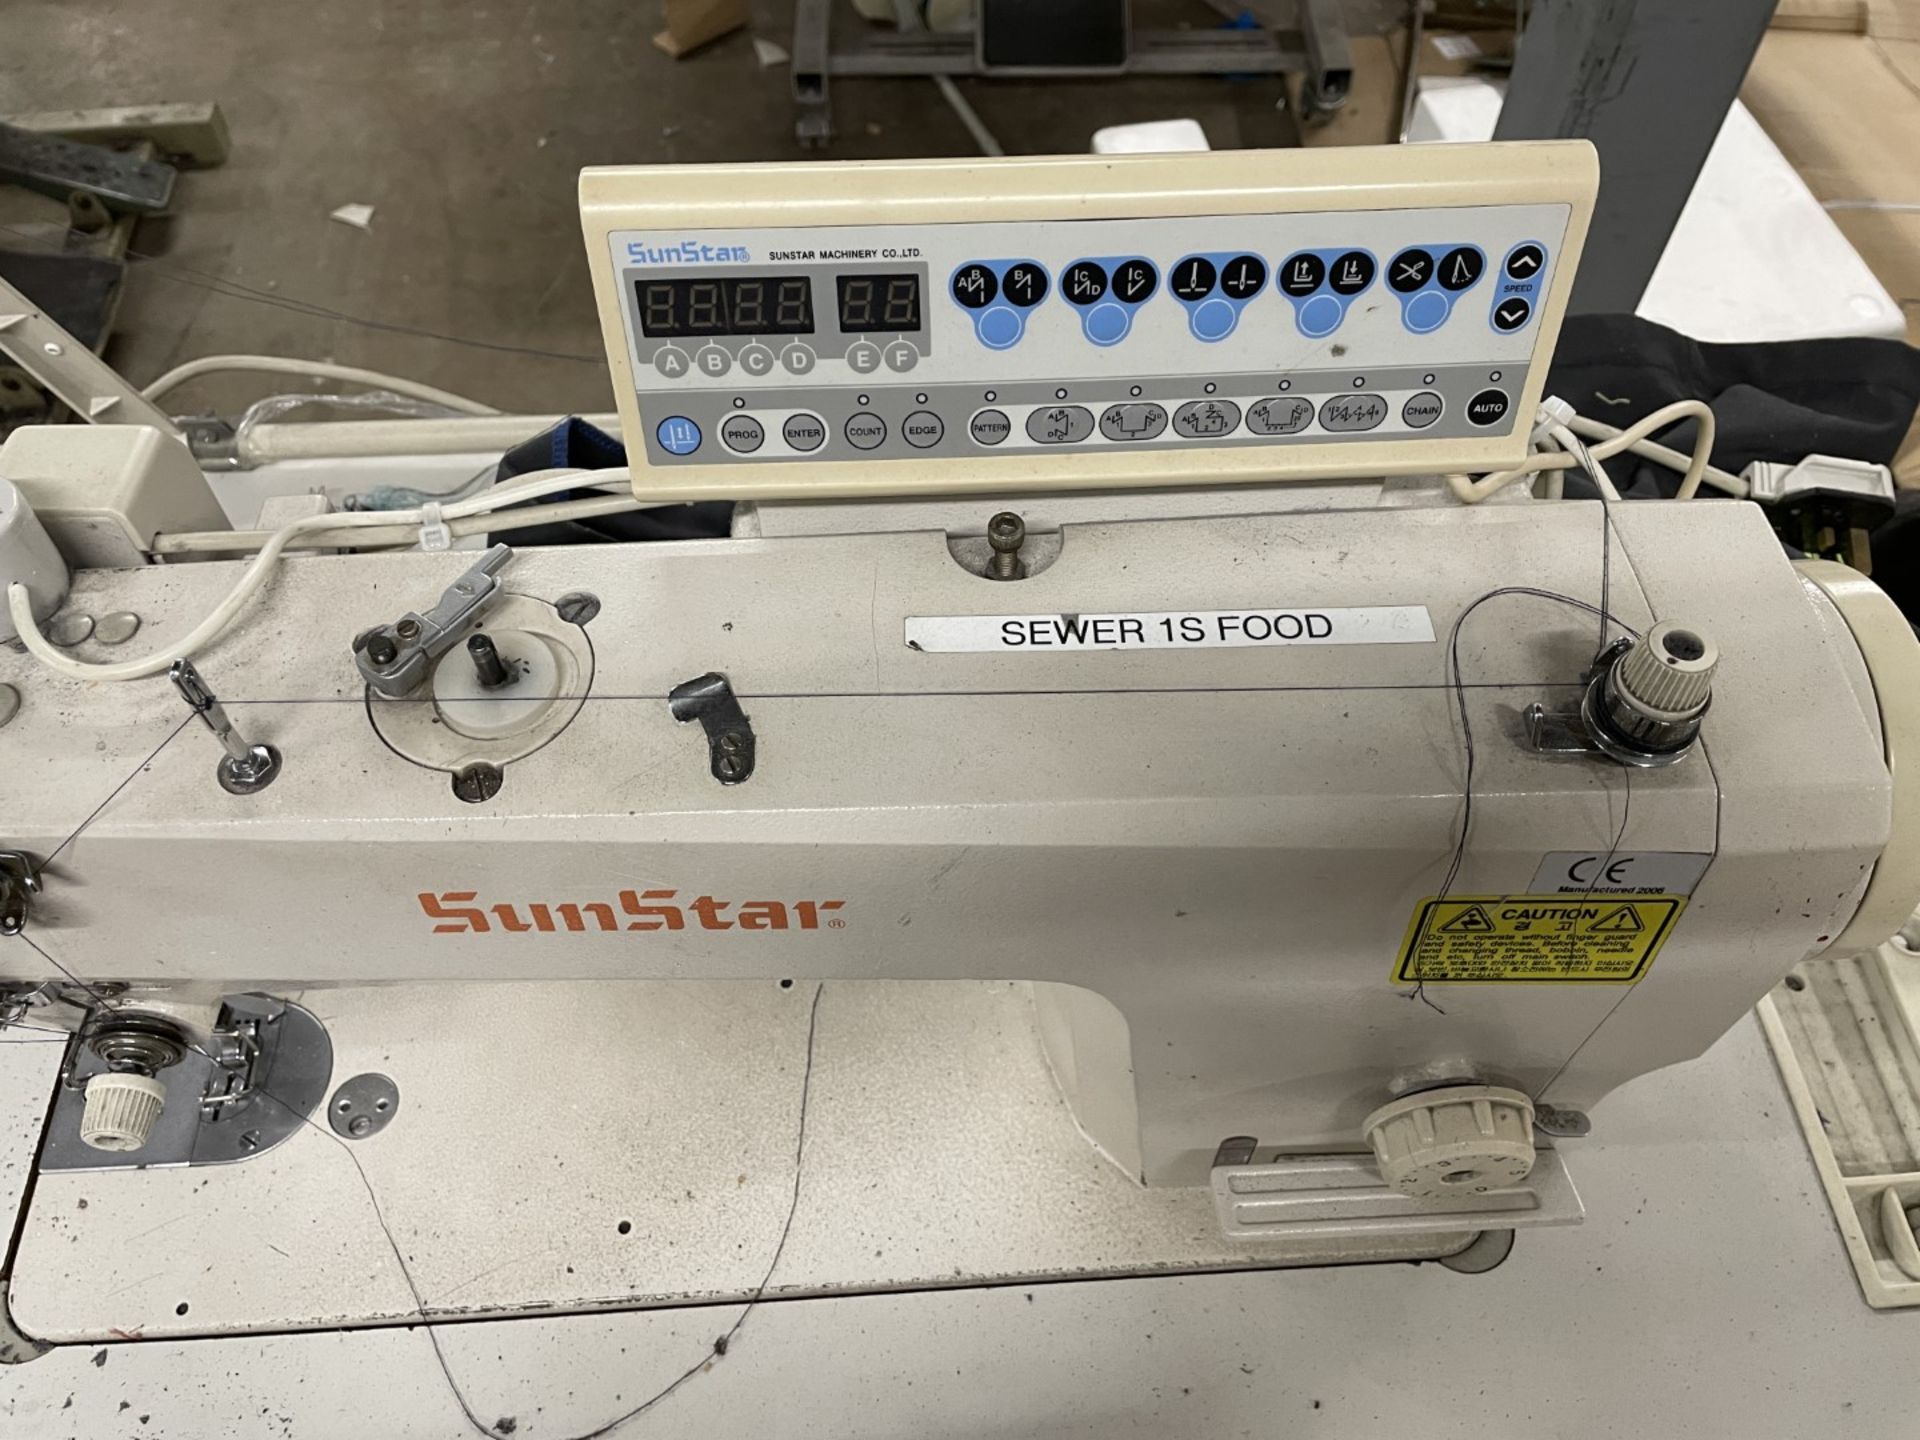 1 x Sunstar KM2300 UMG Single Needle Double Lockstitch Industrial Sewing Machine With Table - Image 9 of 24